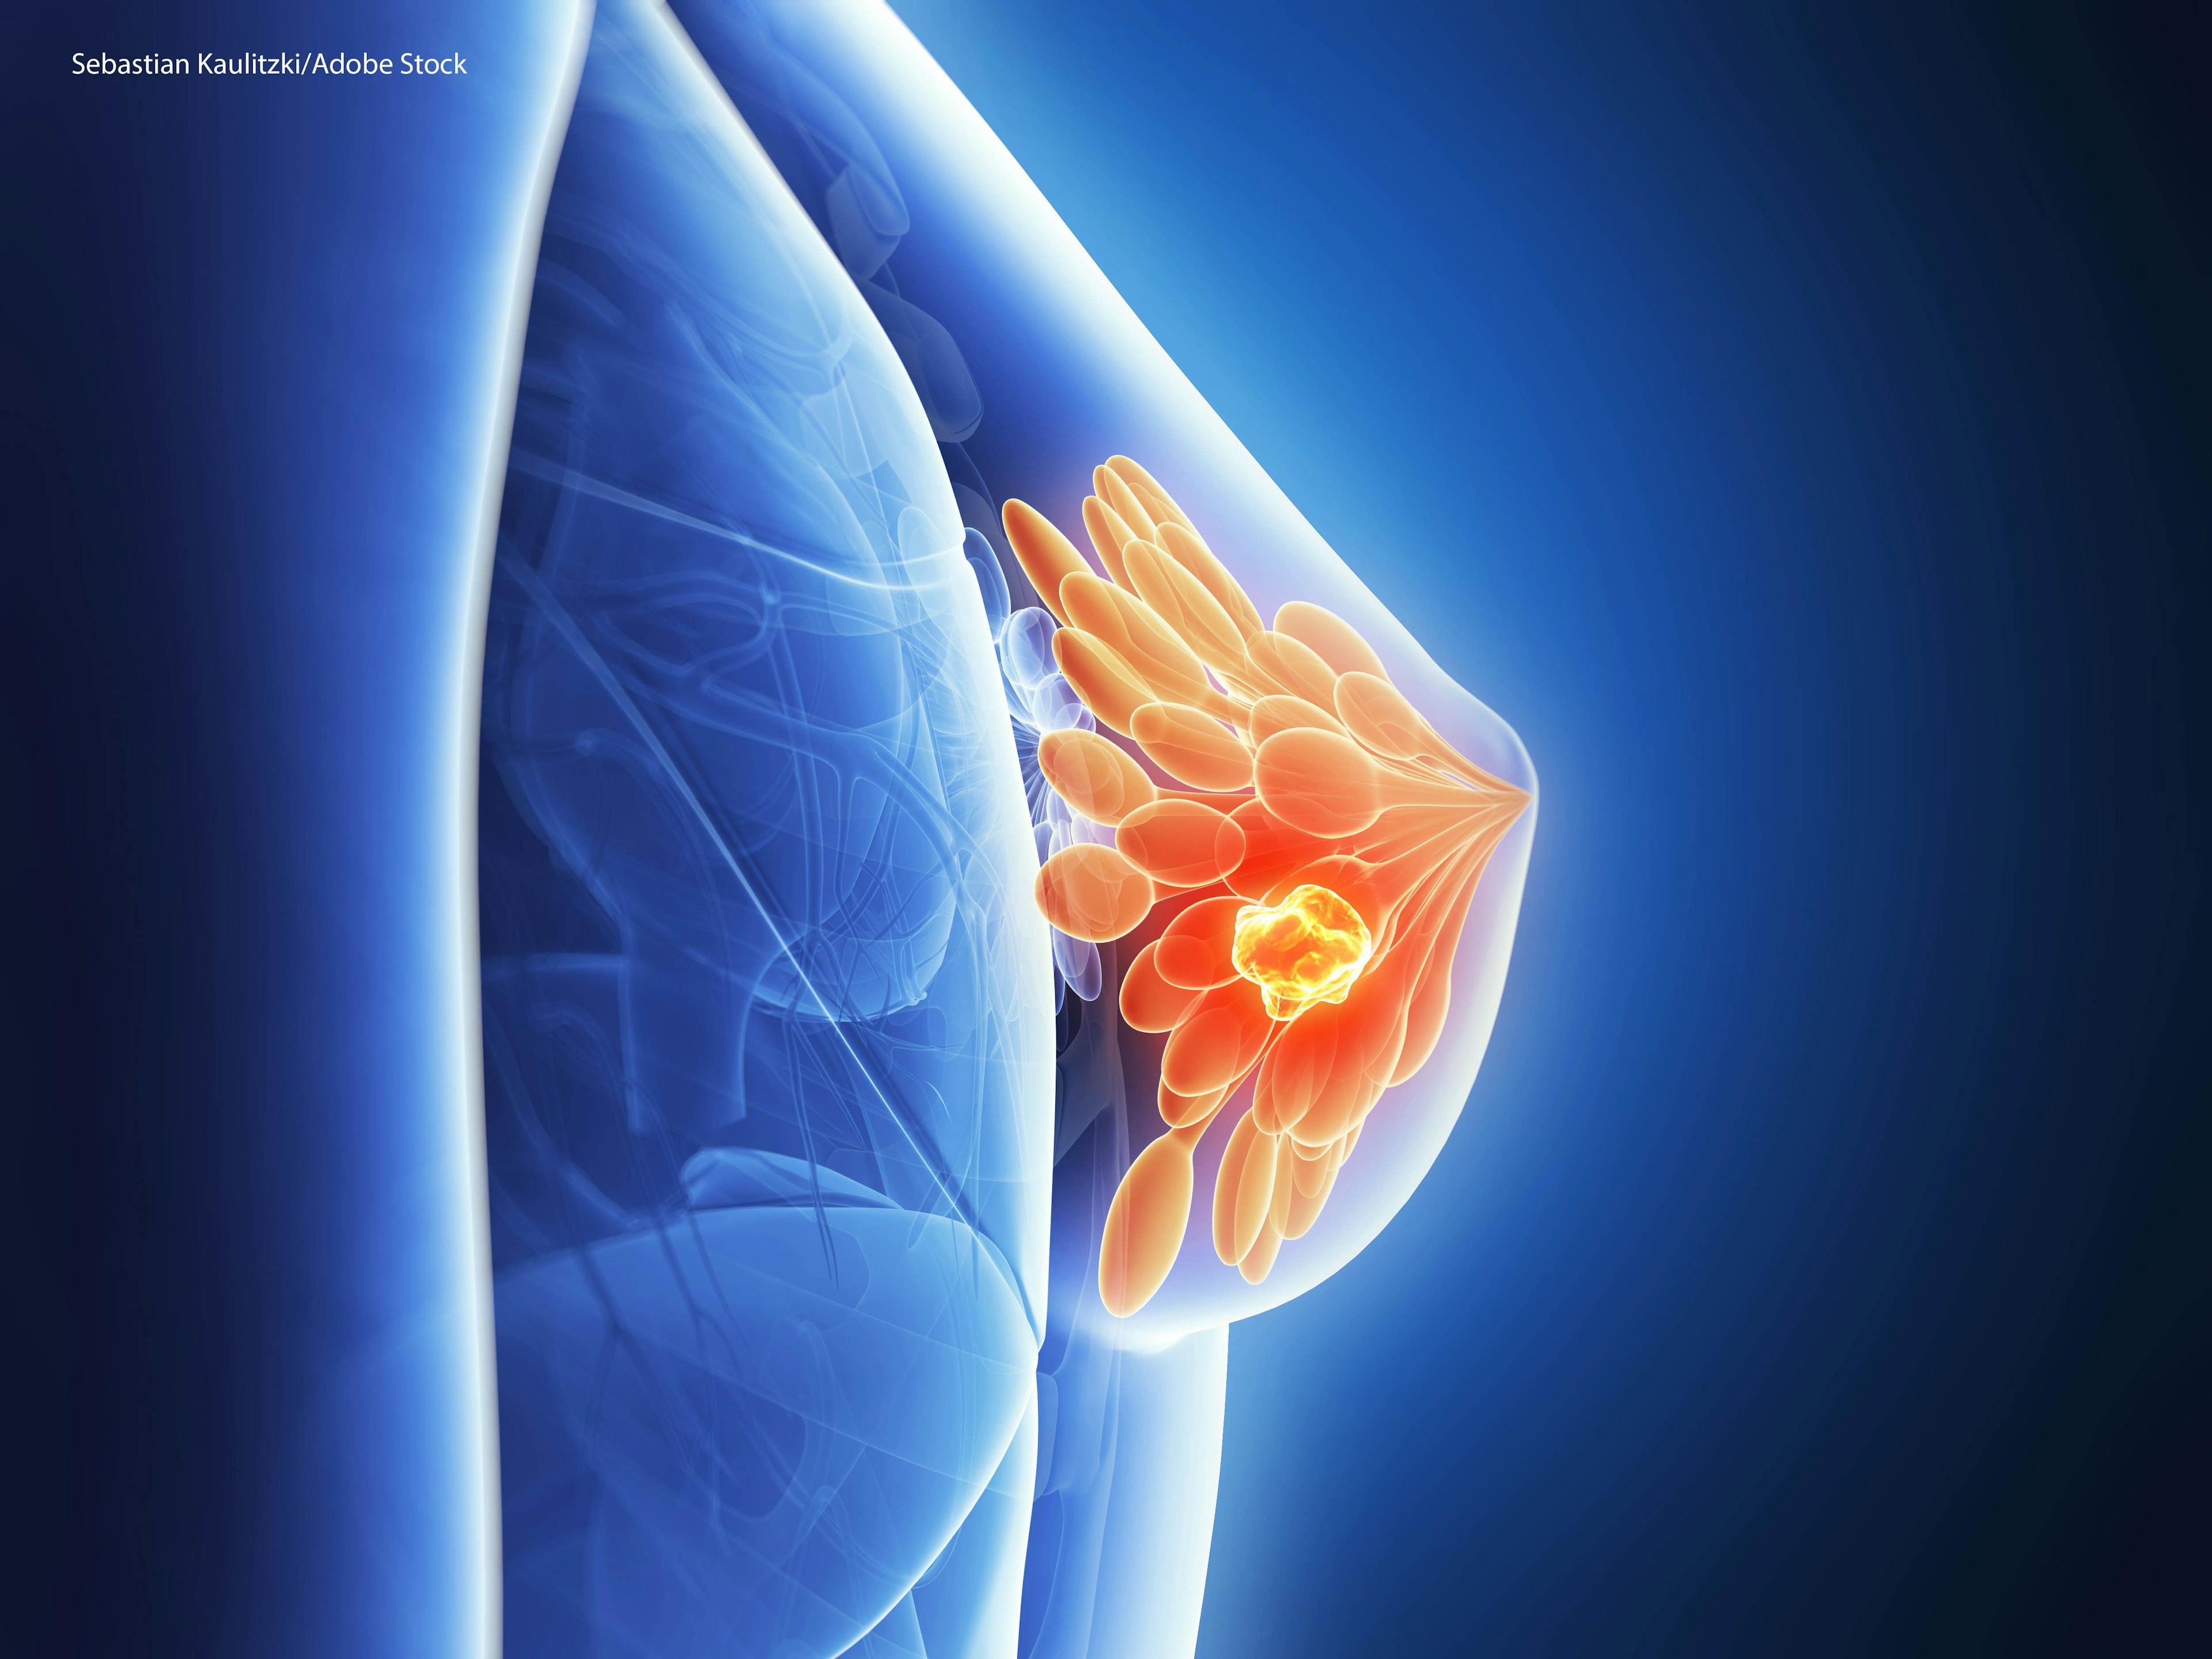 Addition of Pertuzumab to Previous Standards Improves IDFS in HER2+ Breast Cancer